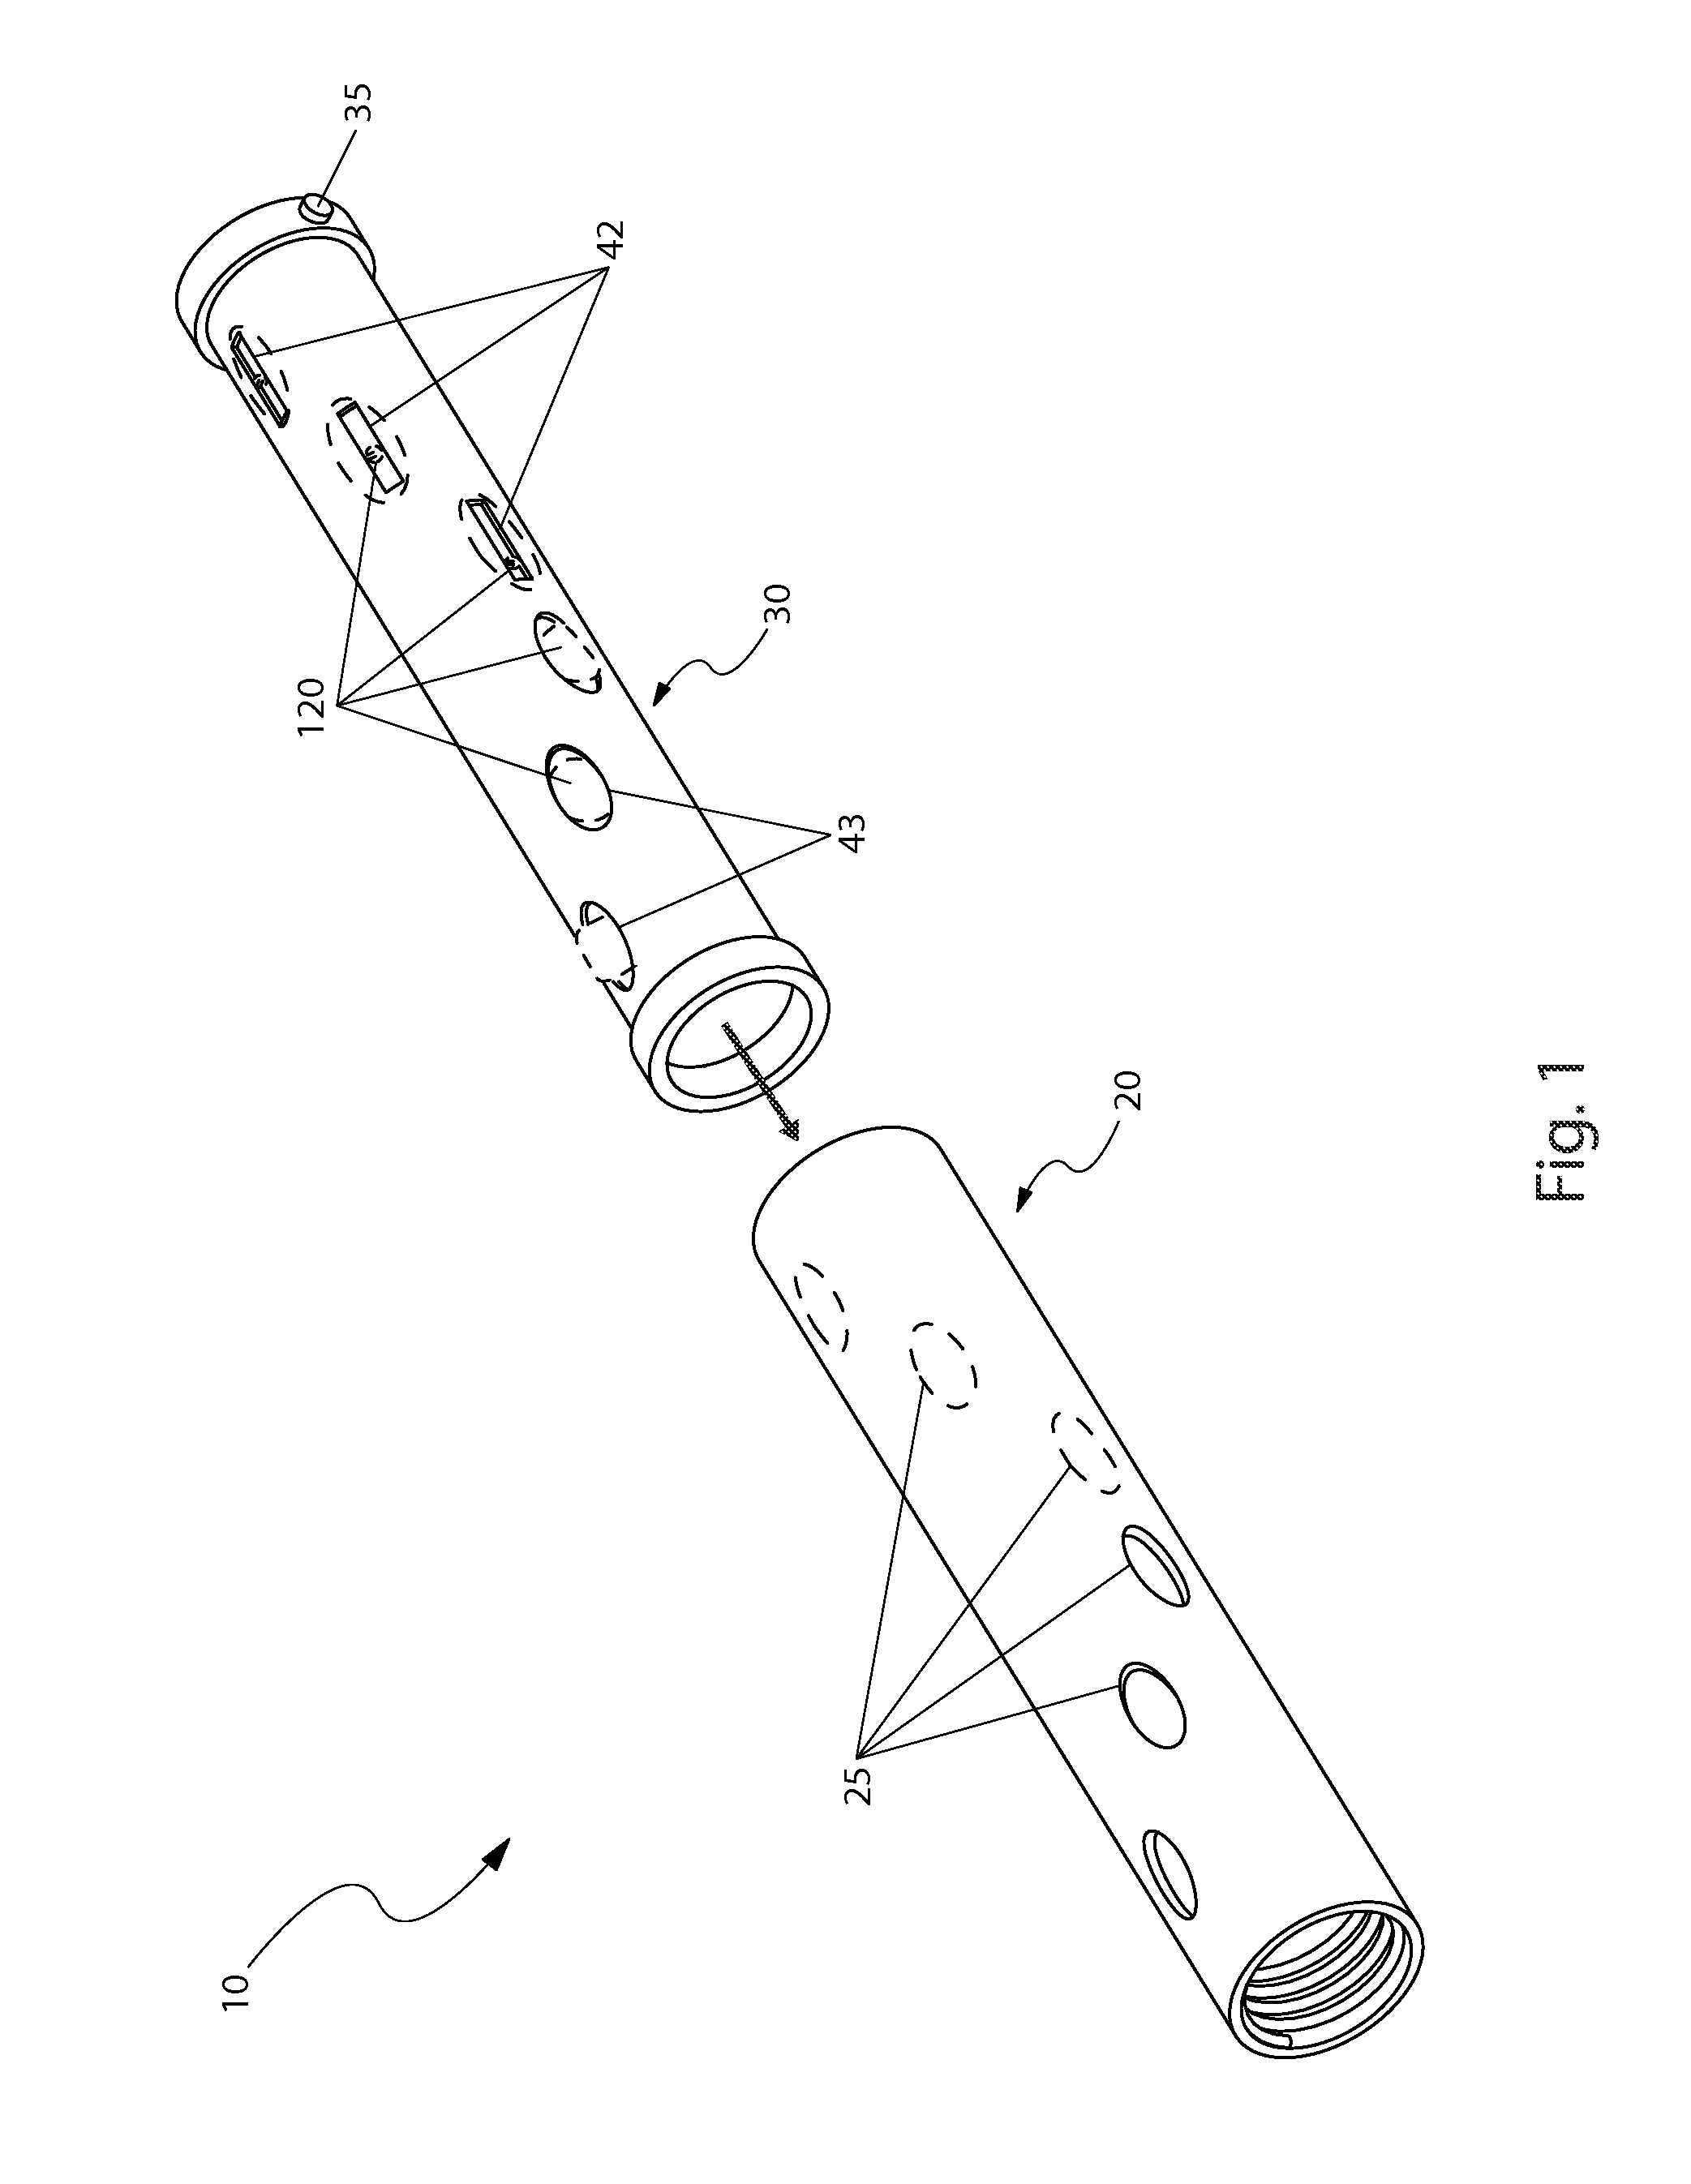 Perforation gun with angled shaped charges